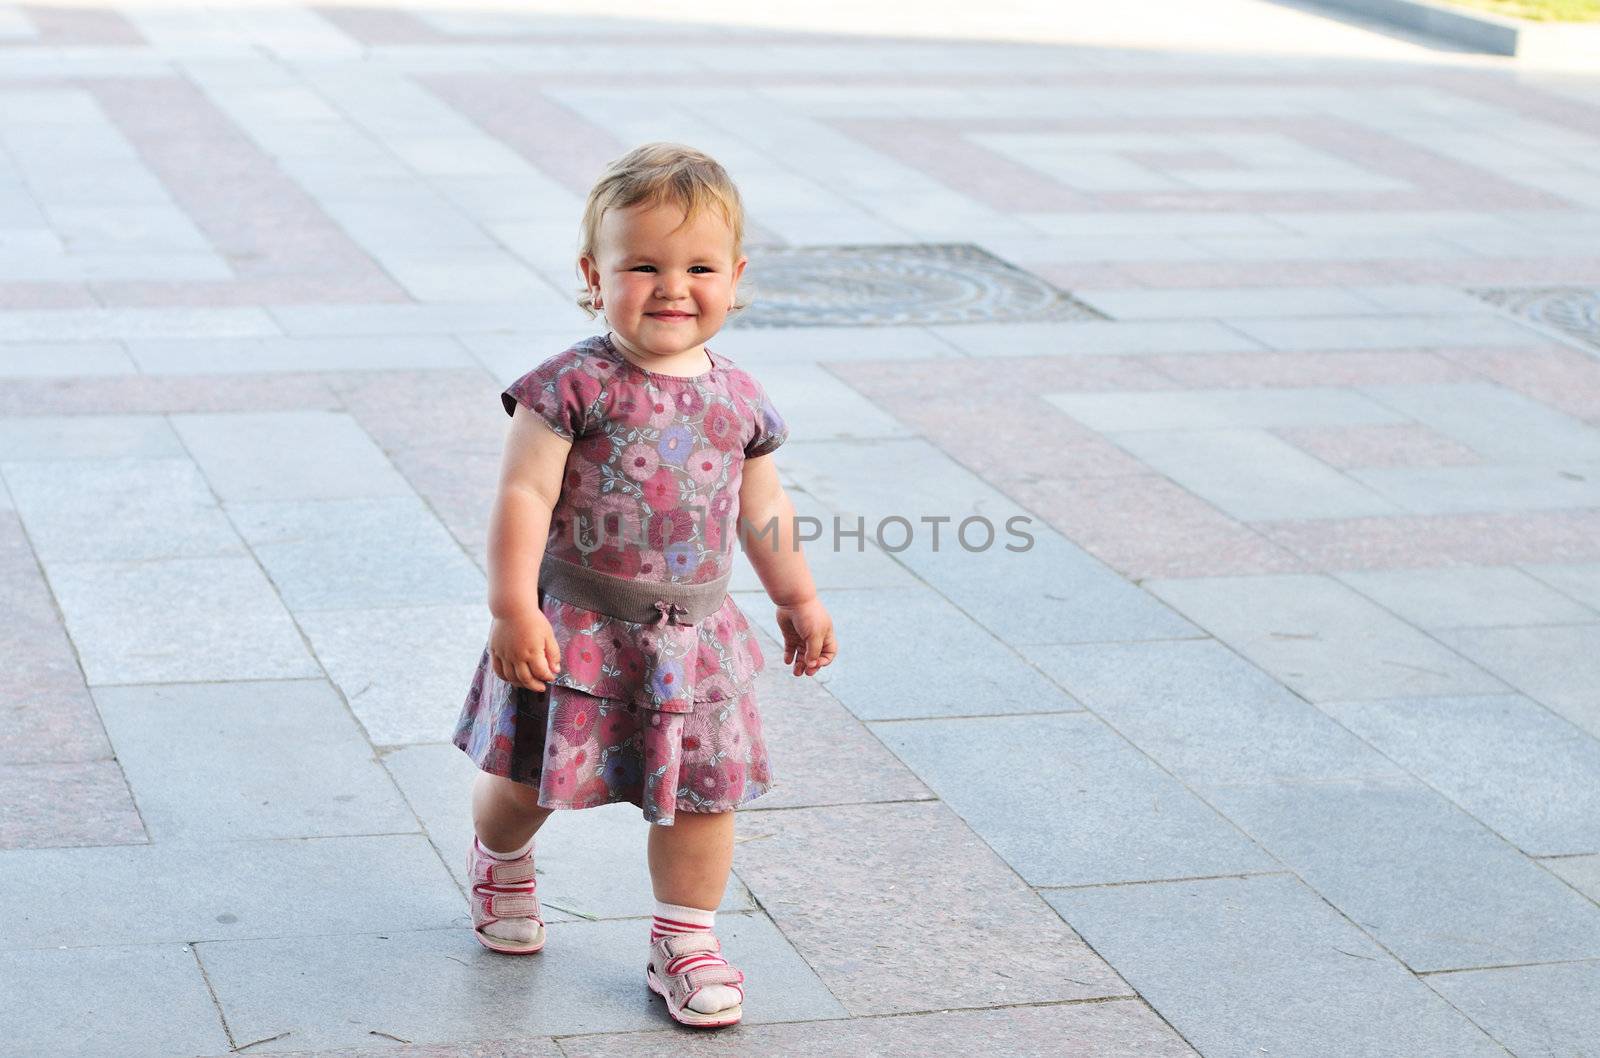 baby girl walking  by the street her first steps